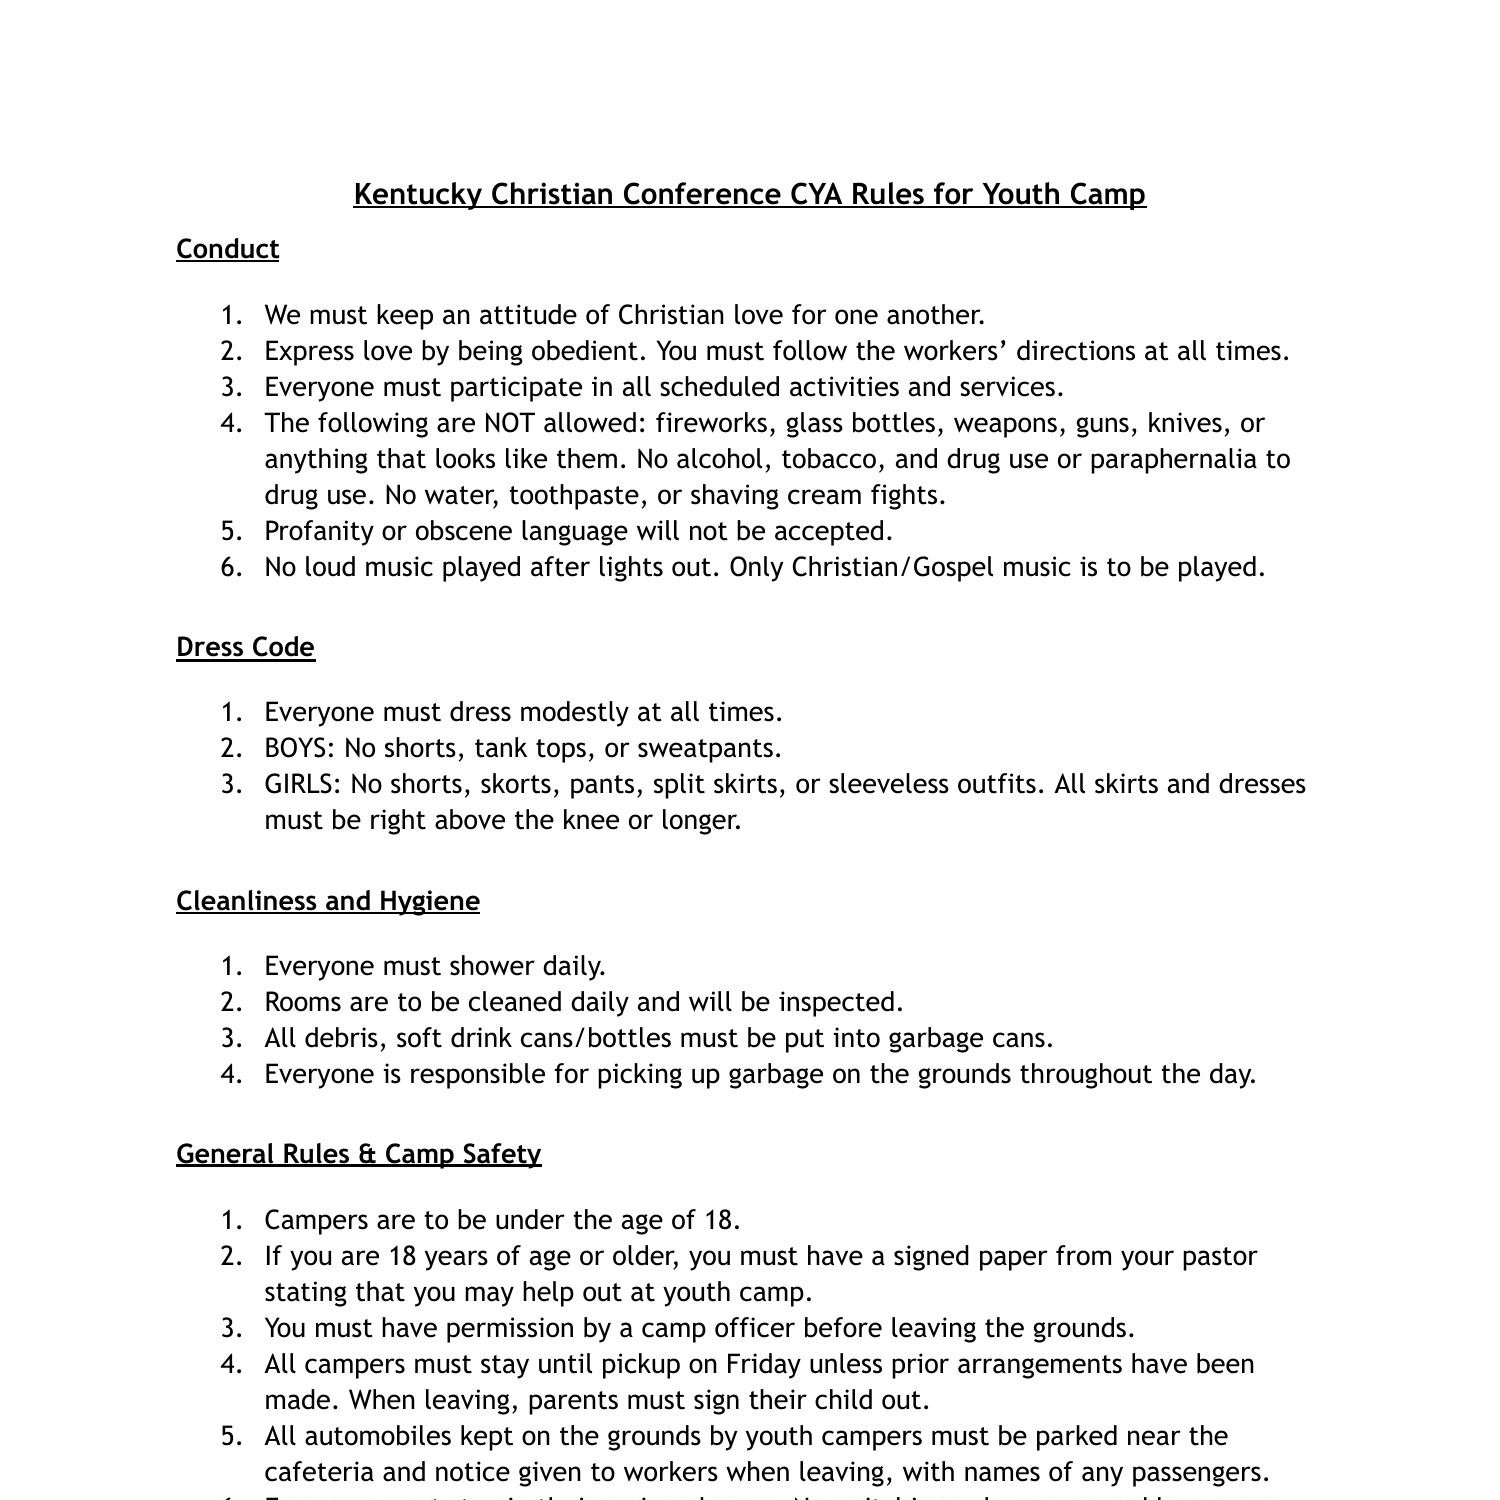 Kentucky Christian Conference CYA Rules for Youth Camp 2023.pdf DocDroid